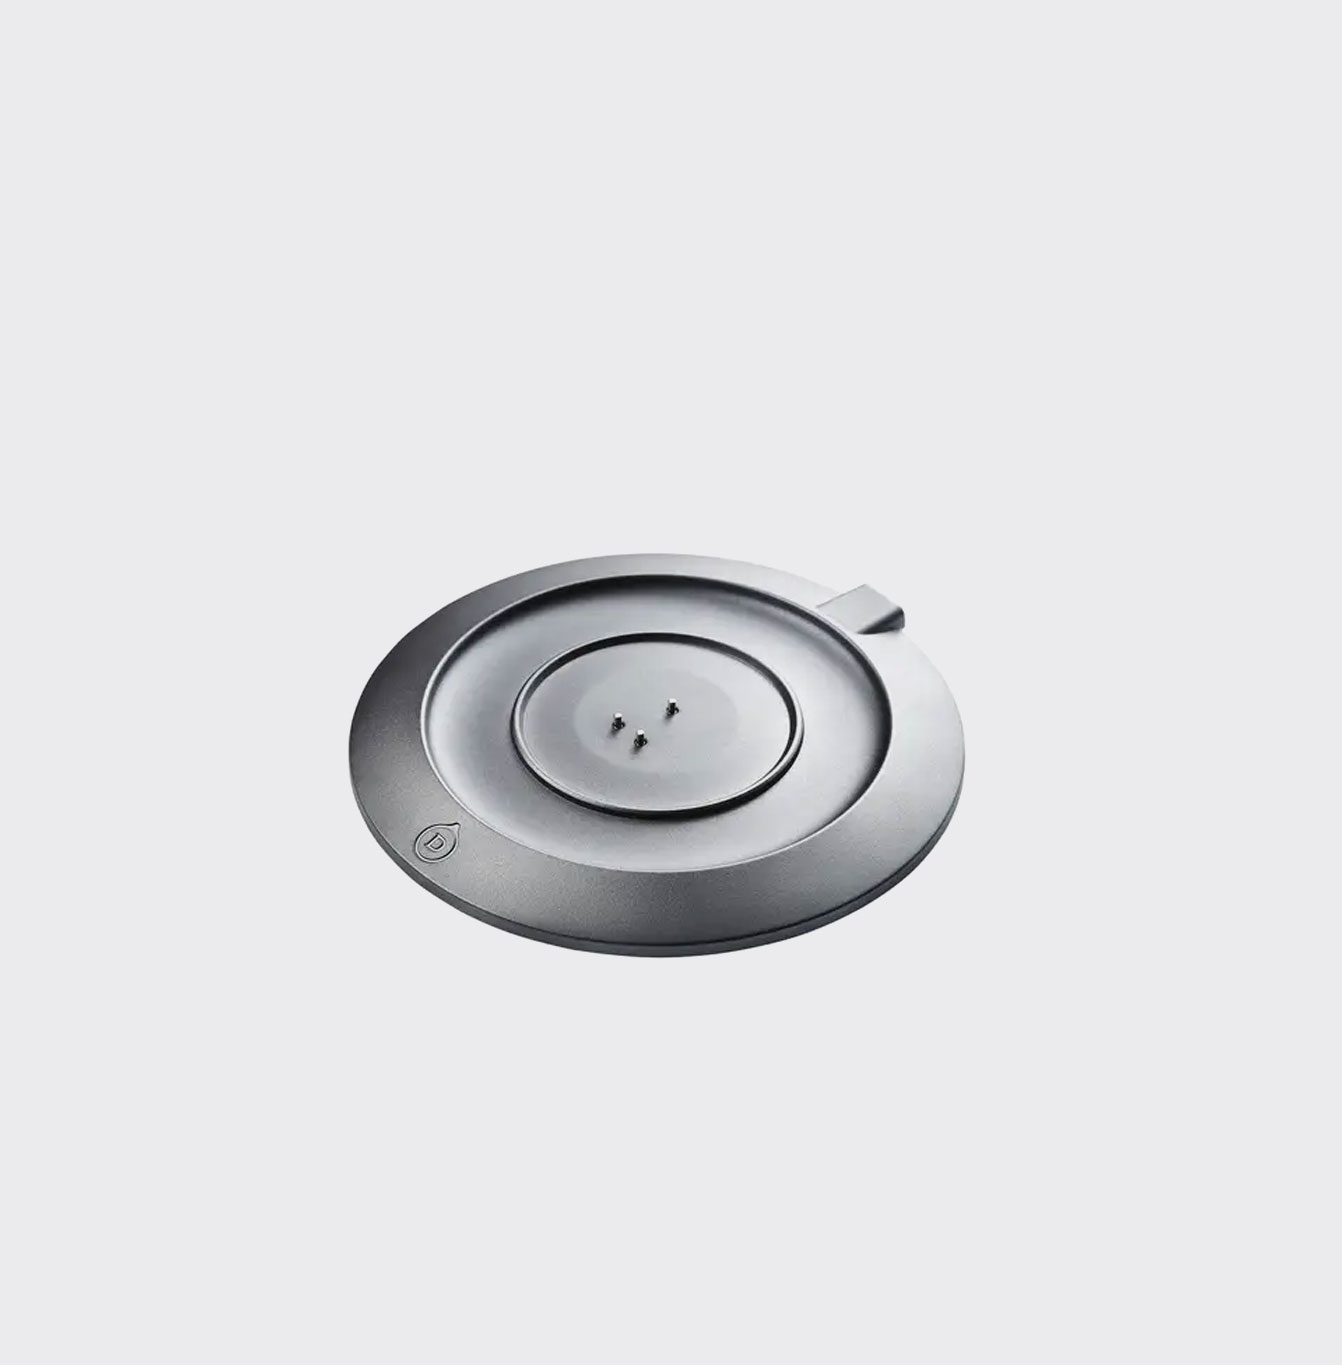 Devialet Mania Charging Station